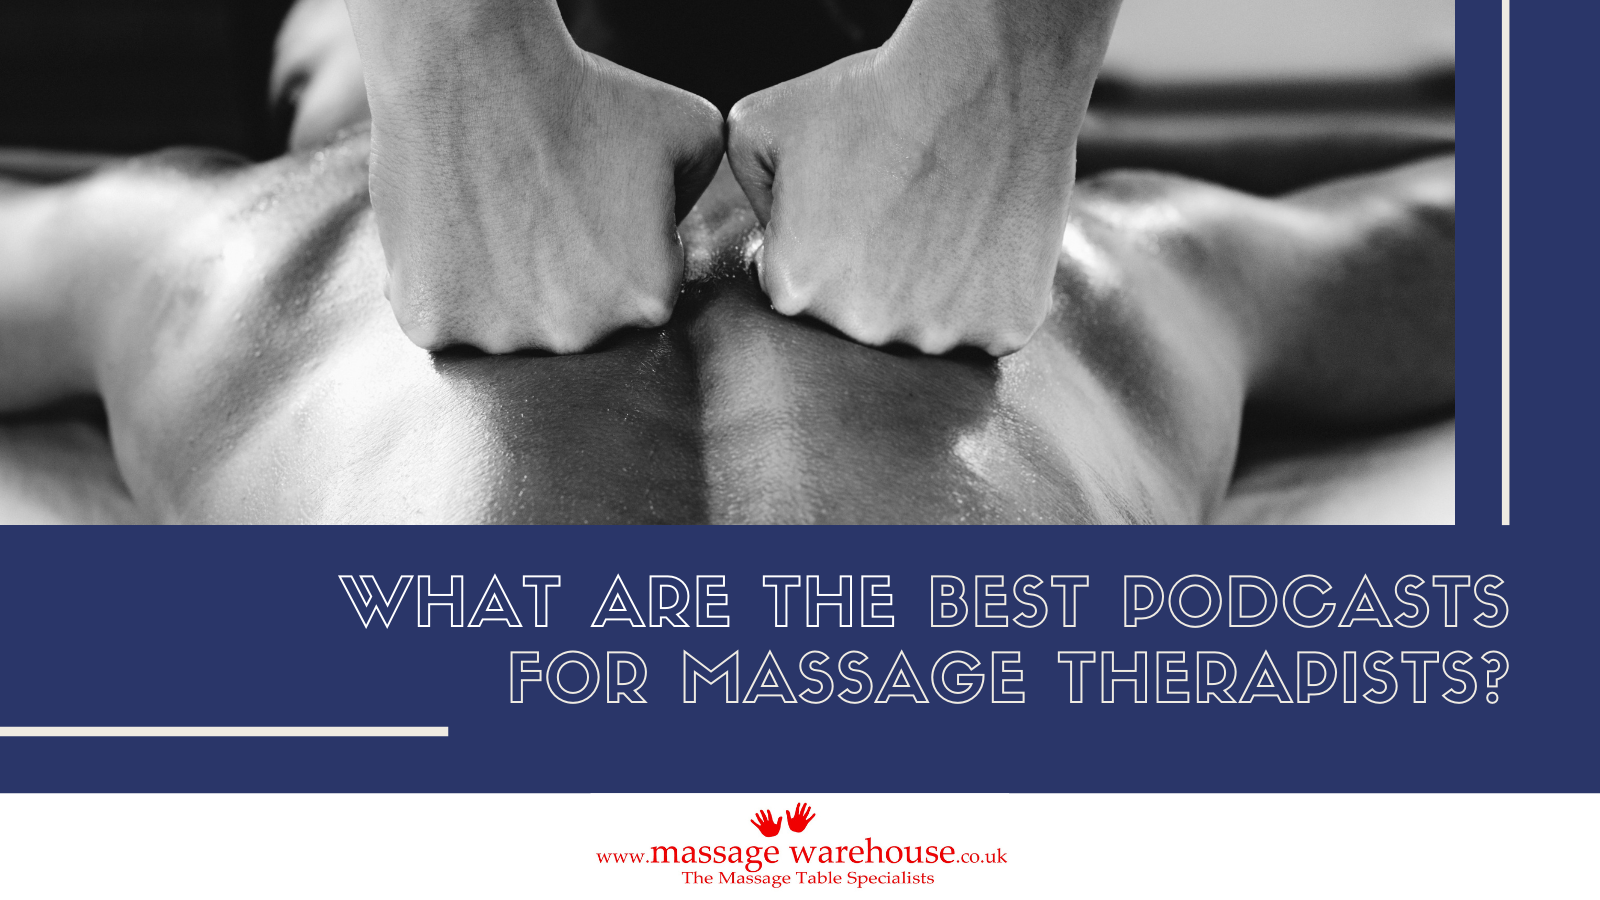 What are the best podcasts for massage therapists?